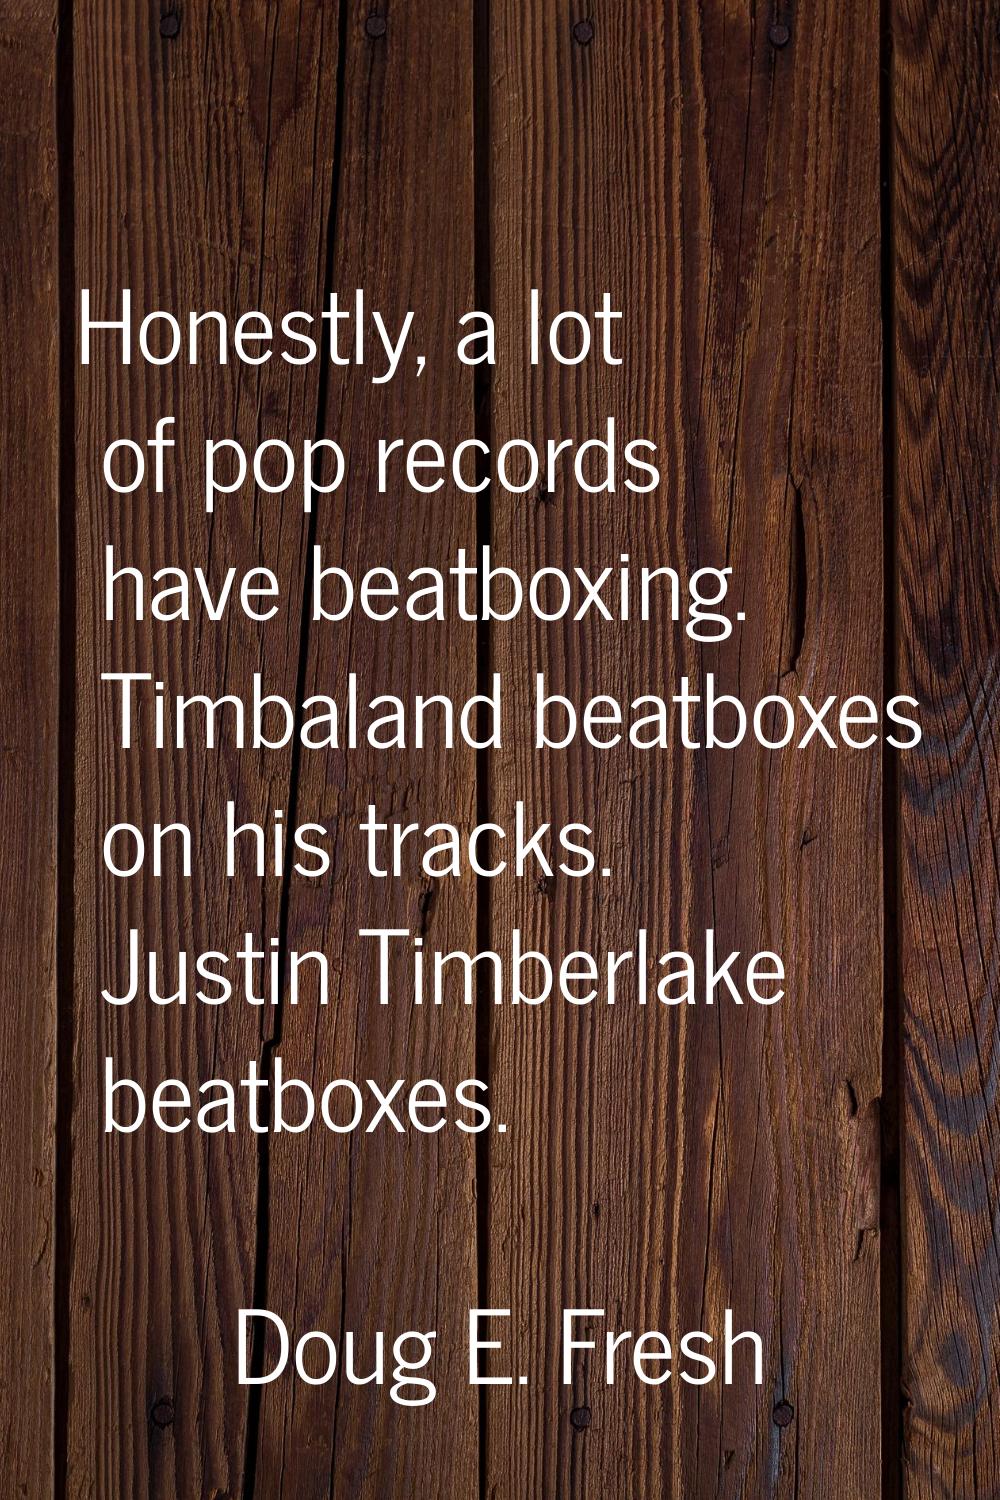 Honestly, a lot of pop records have beatboxing. Timbaland beatboxes on his tracks. Justin Timberlak